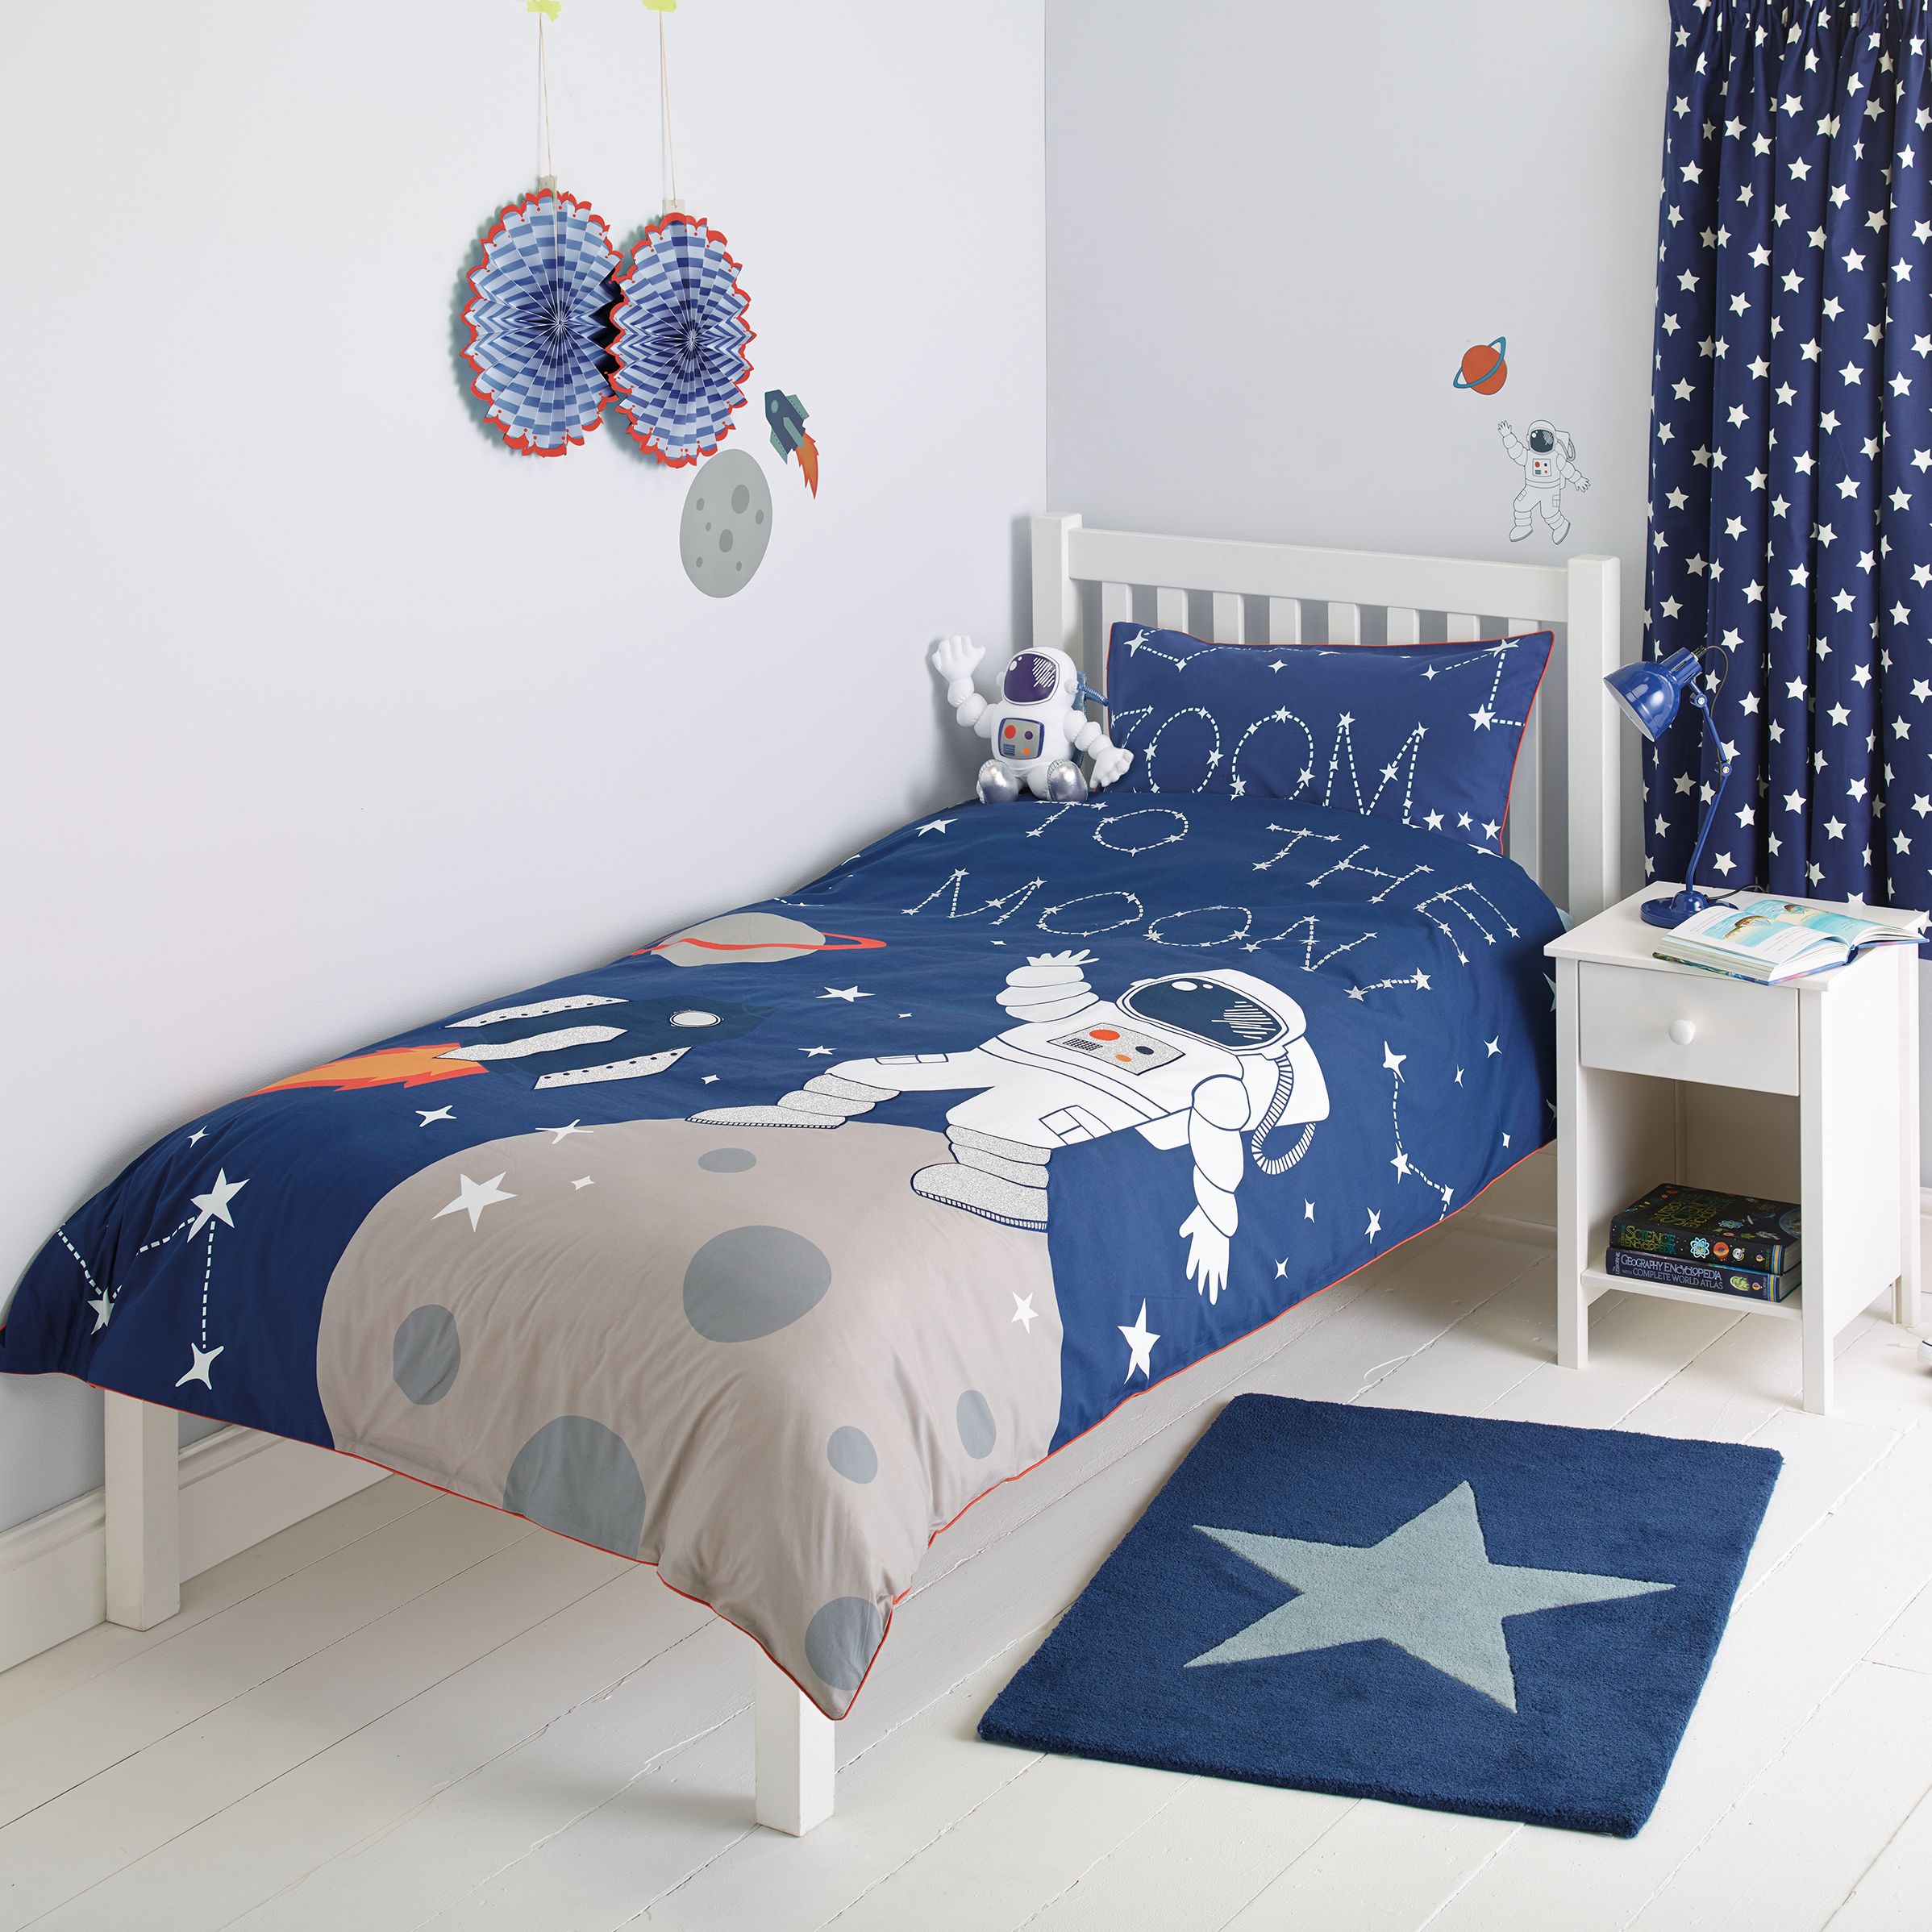 Little Home At John Lewis Moon Back Applique Duvet Cover And